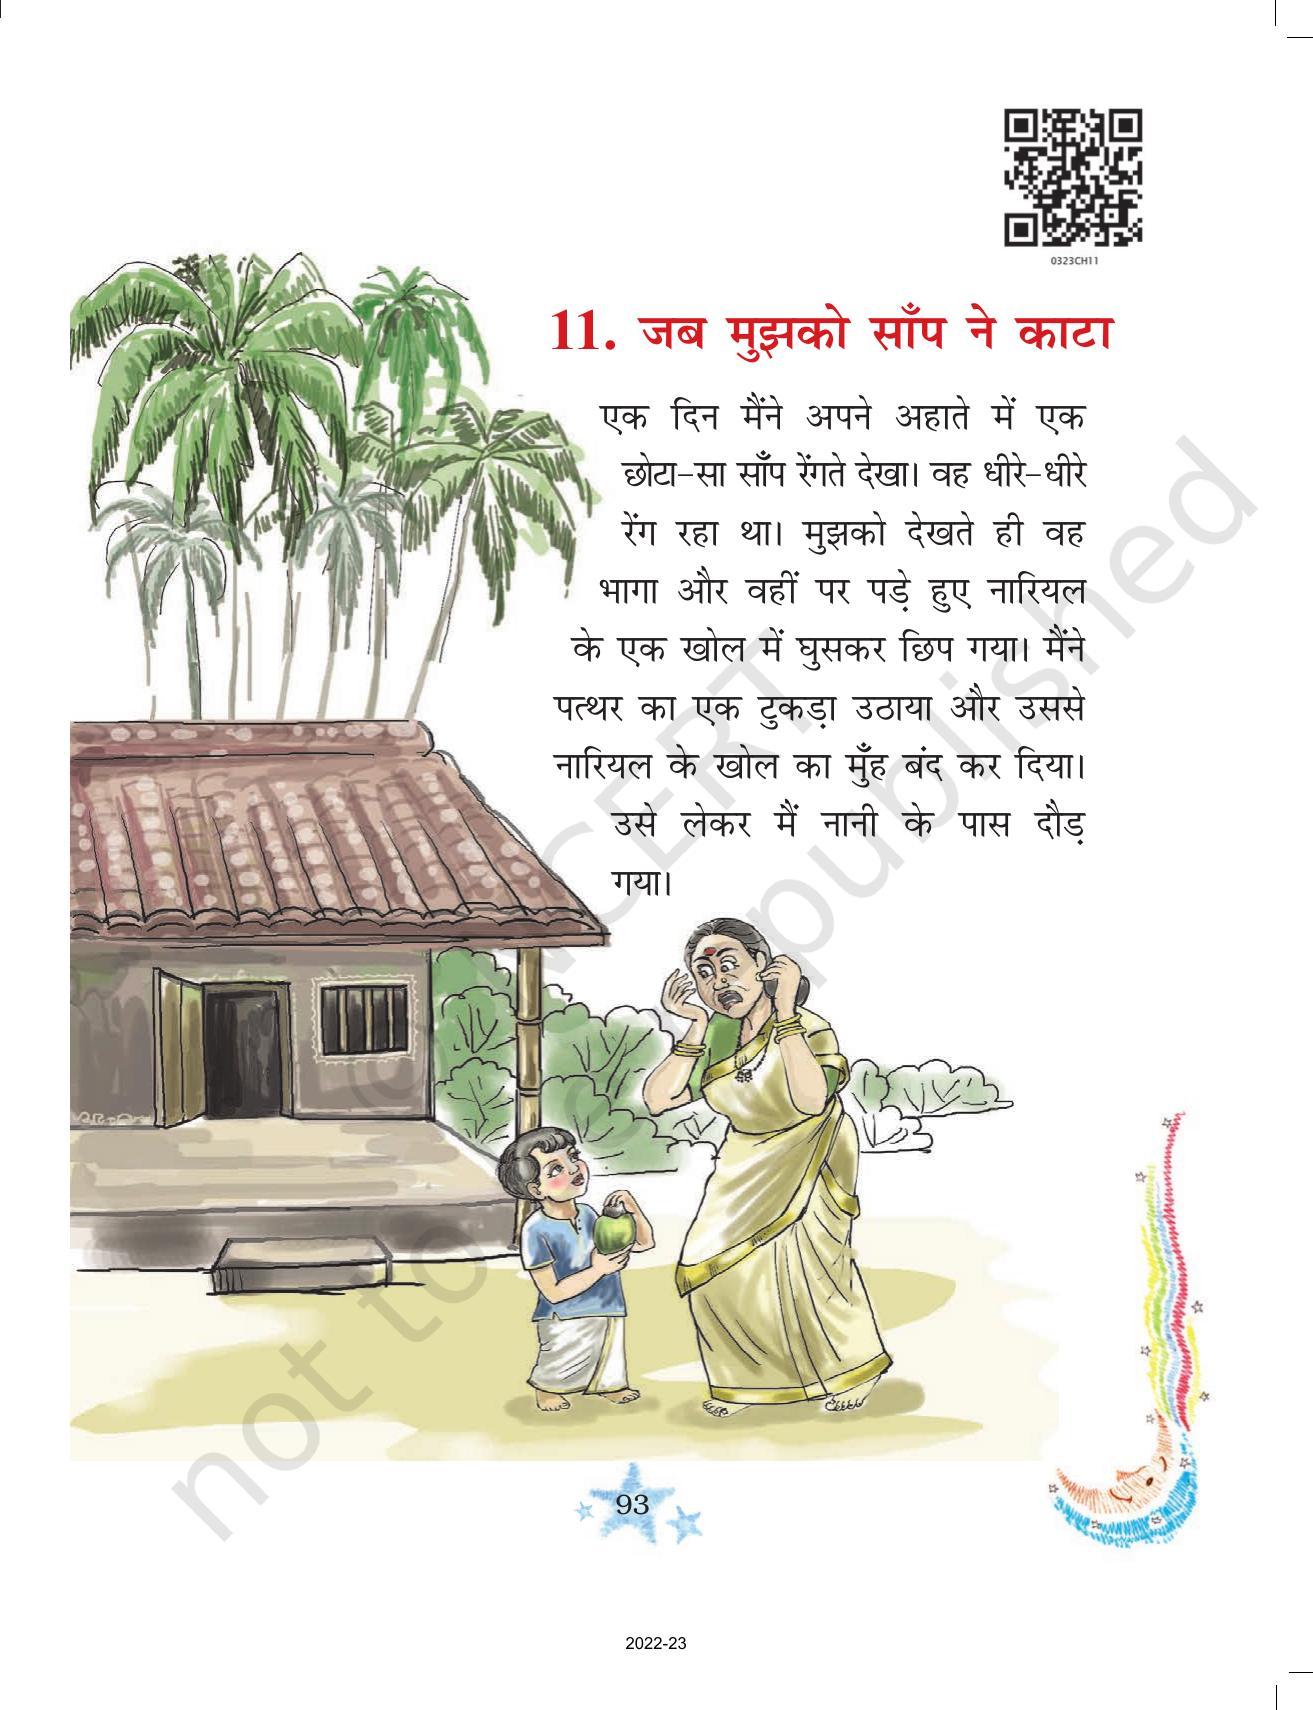 NCERT Book for Class 3 Hindi Chapter 10-जब मुझे साँप ने काटा - Page 1